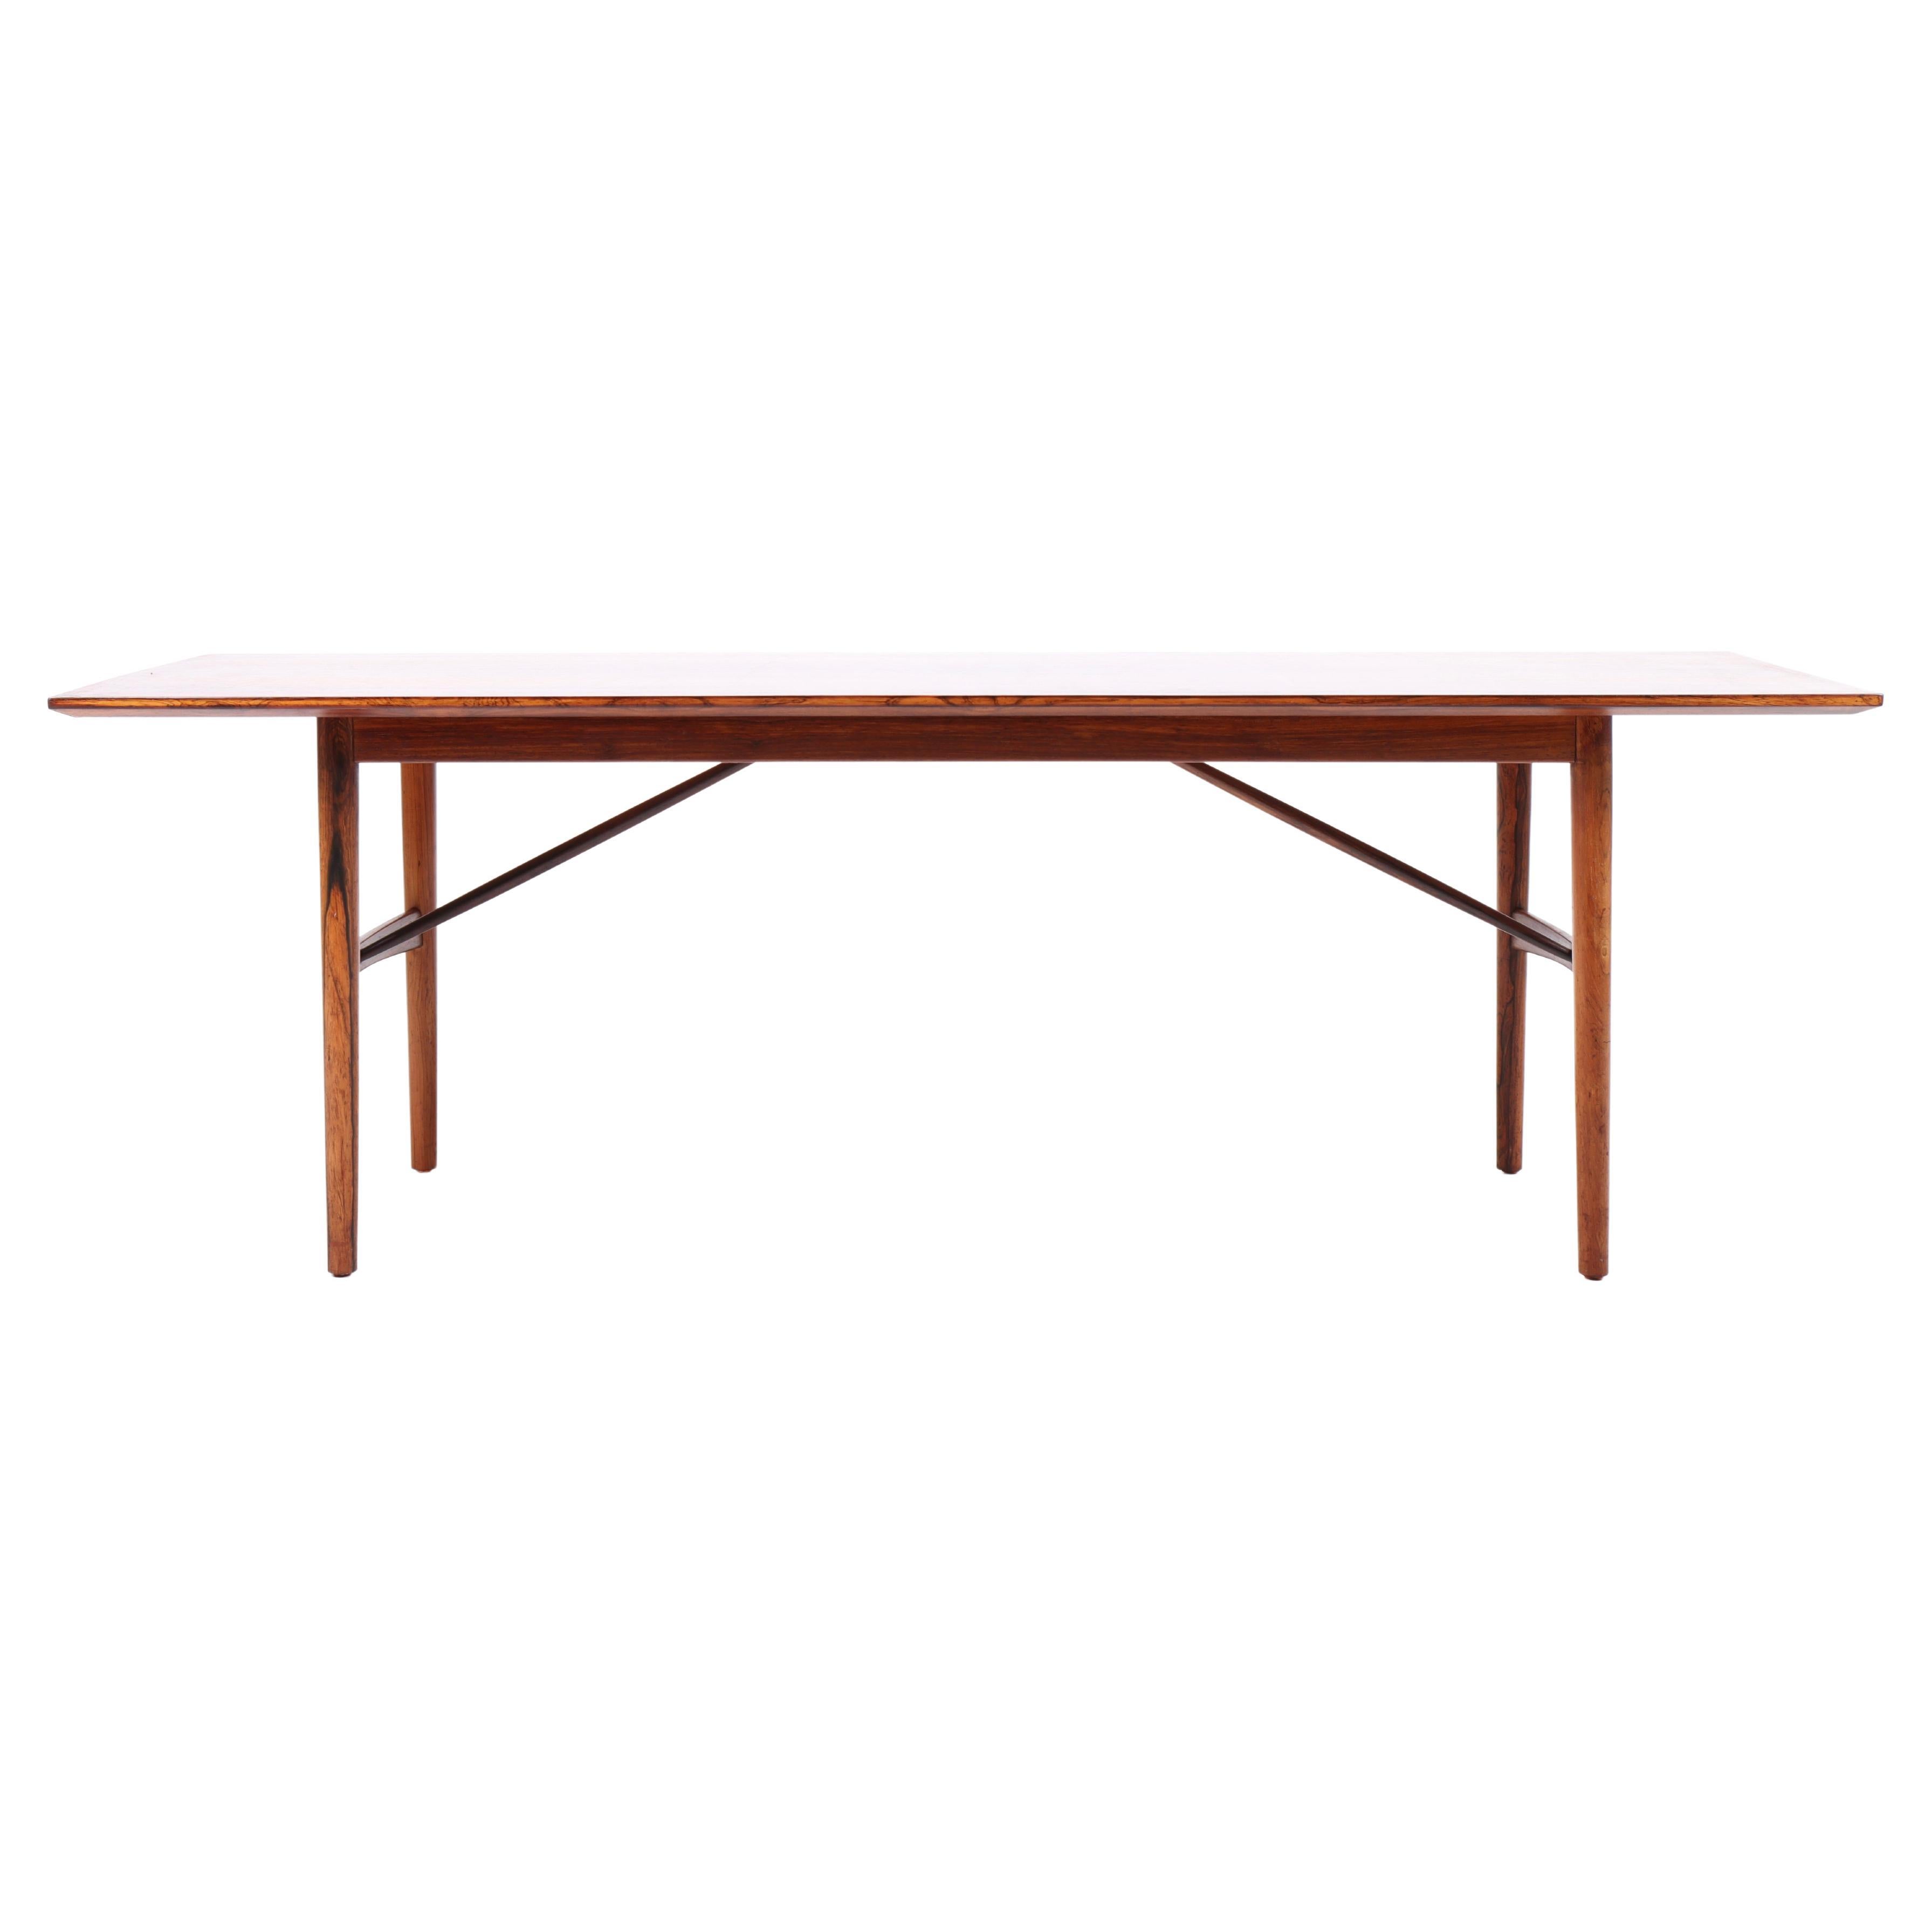 Elegant Low Table in Rosewood by Steffen Syrach Larsen, 1950s For Sale